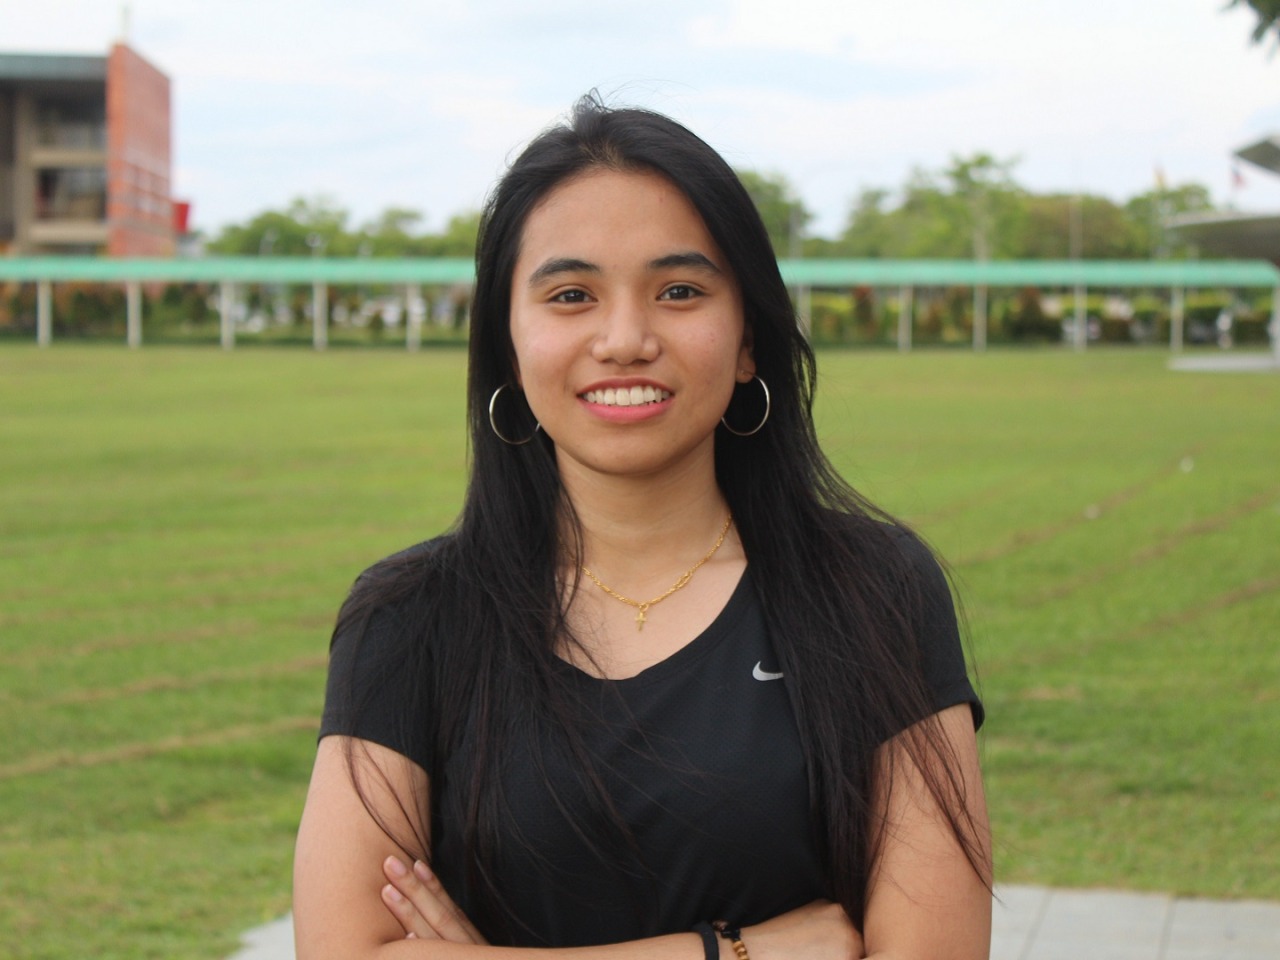 “When I first joined Curtin Malaysia, I thought university life would be dull and boring. I only focused on my studies and didn’t join any university events because I’m a shy and introverted person by nature. “However, during my second semester in...